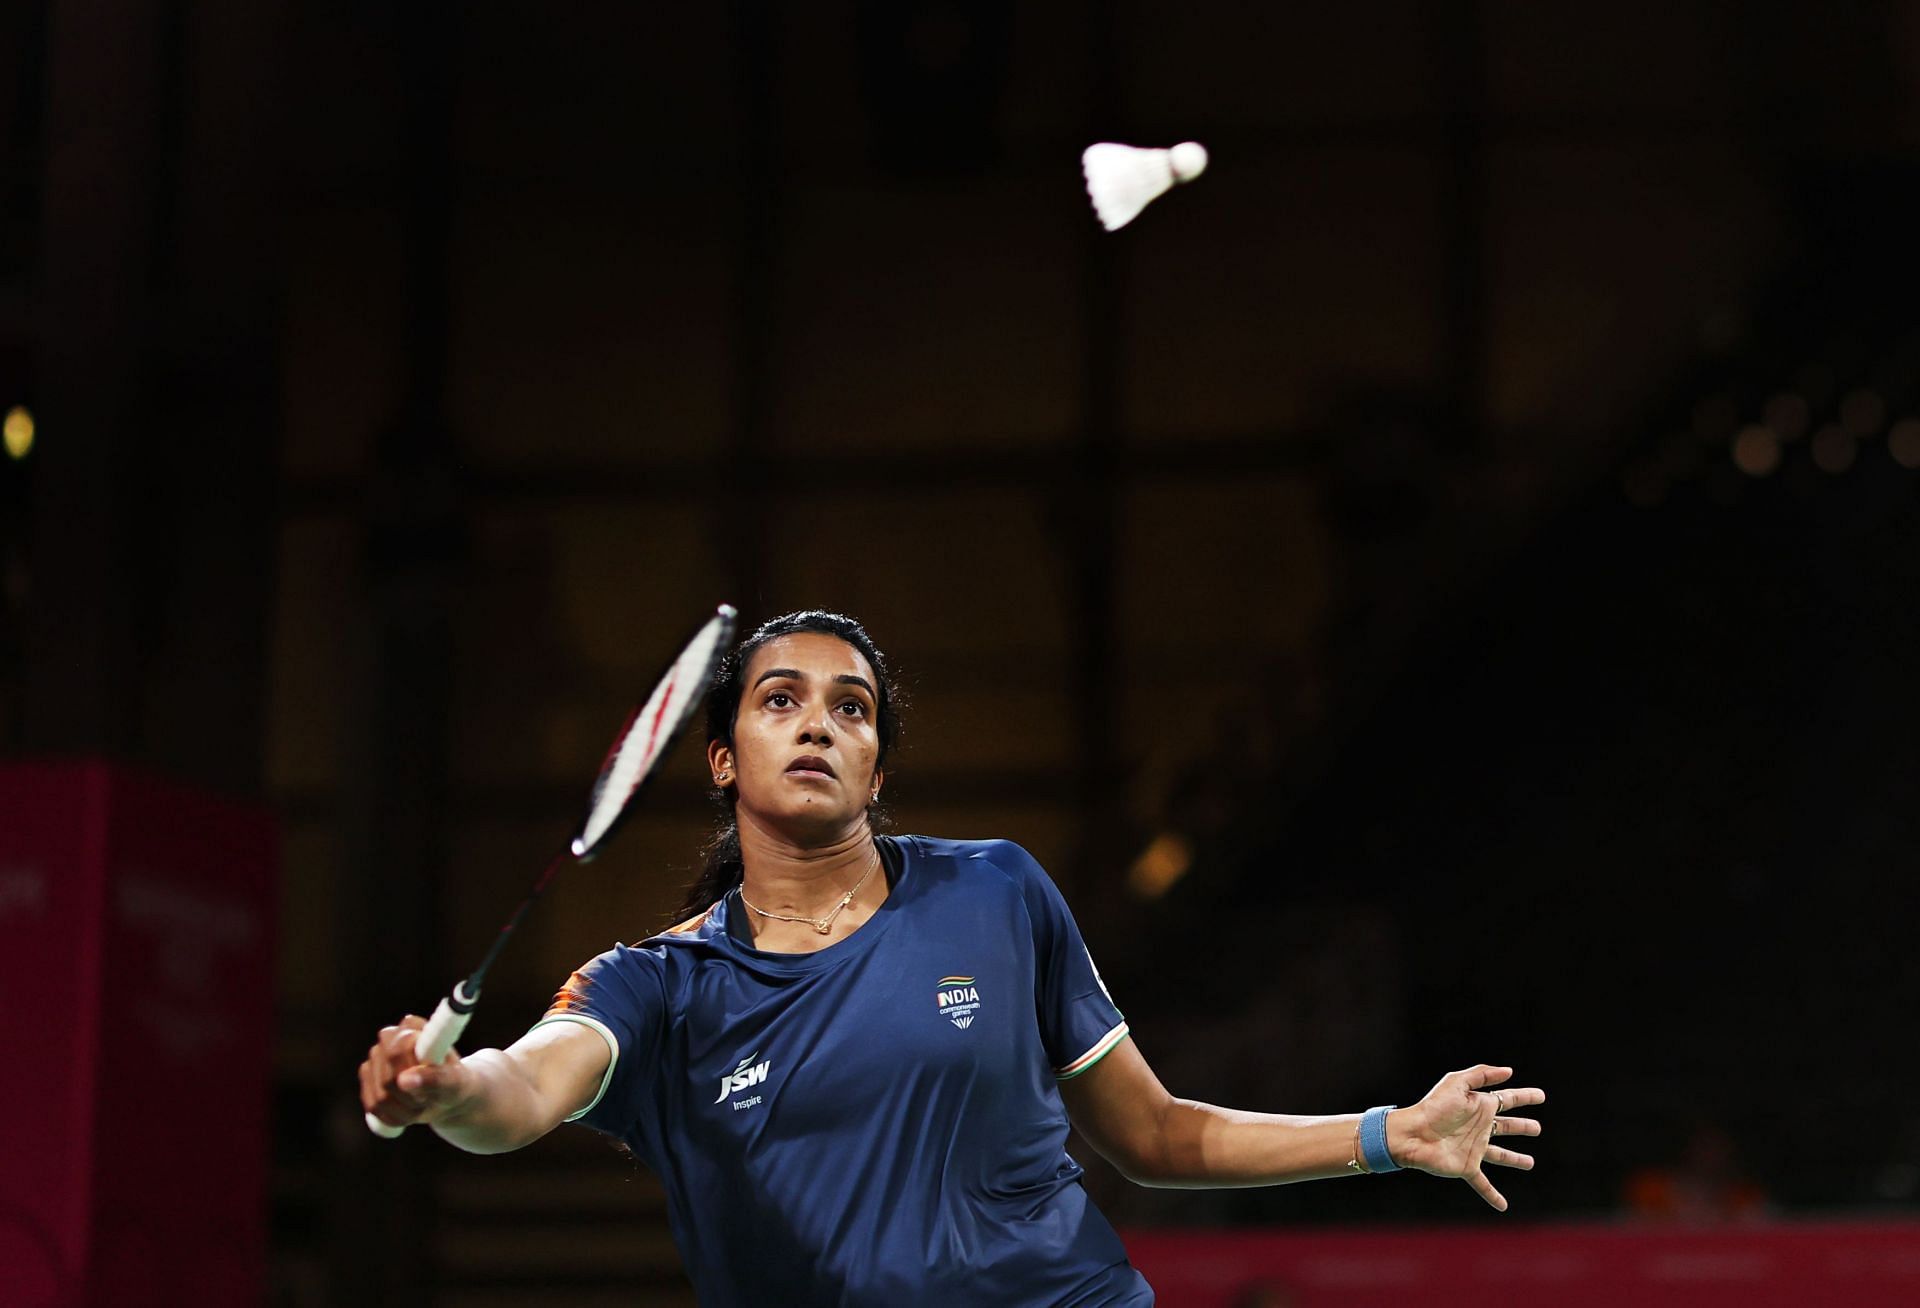 Can PV Sindhu get back to winning ways? (Image: Getty)